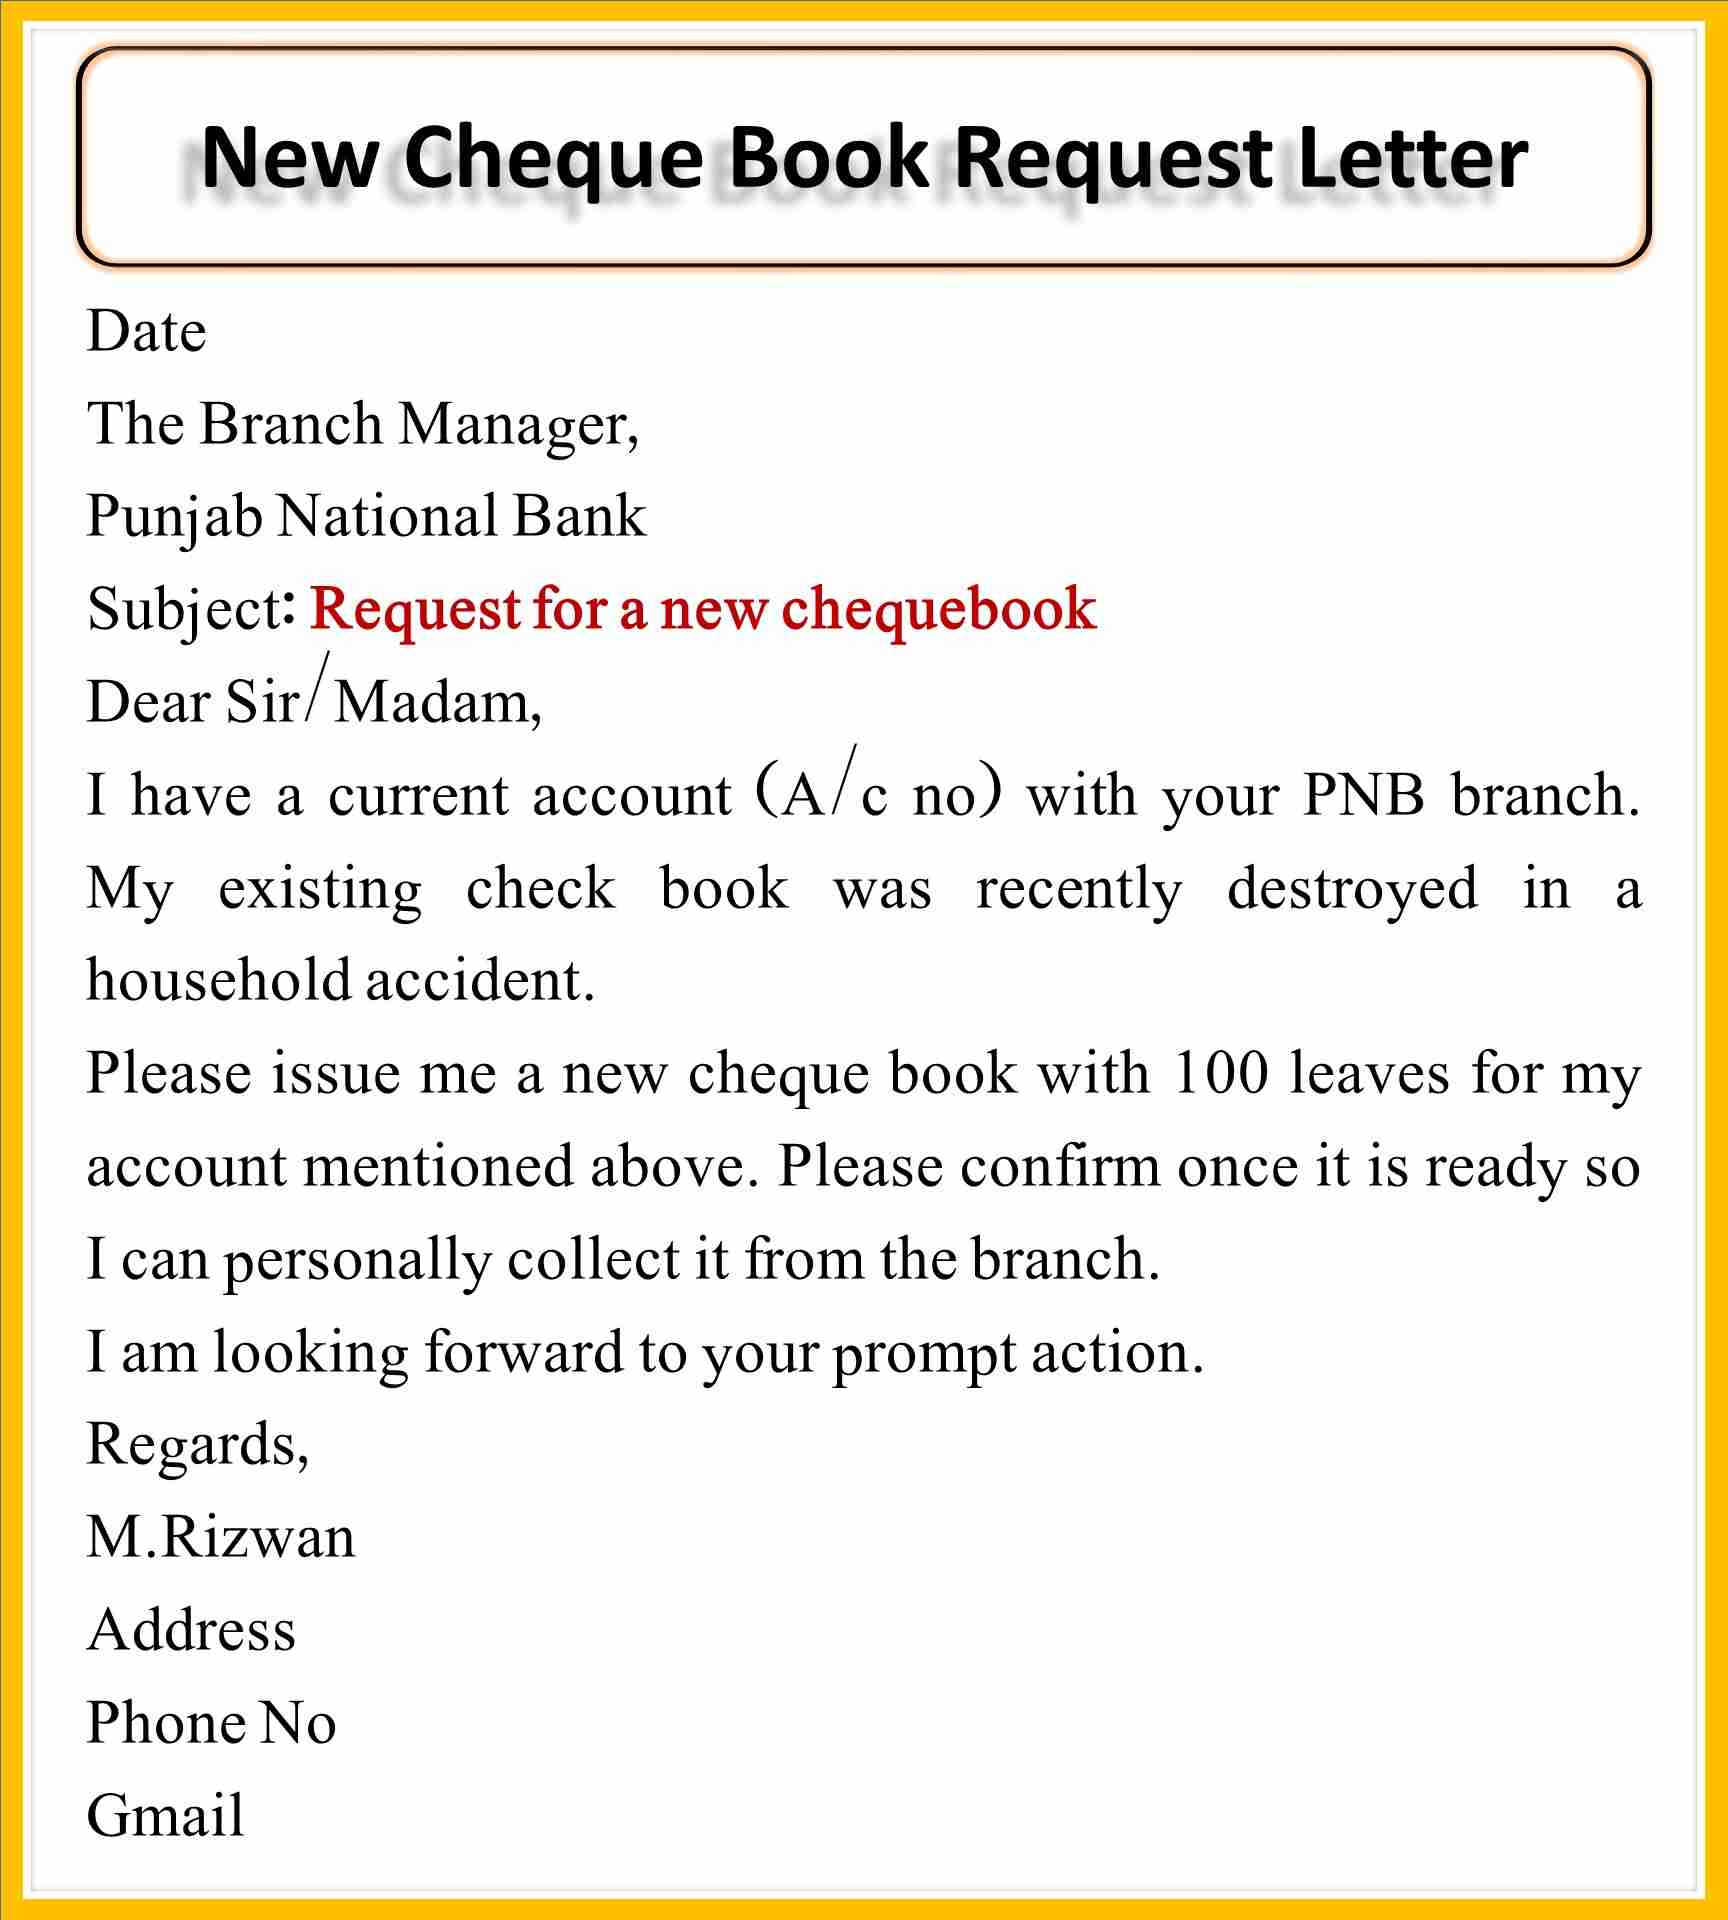 New Cheque Book Request Letter in English